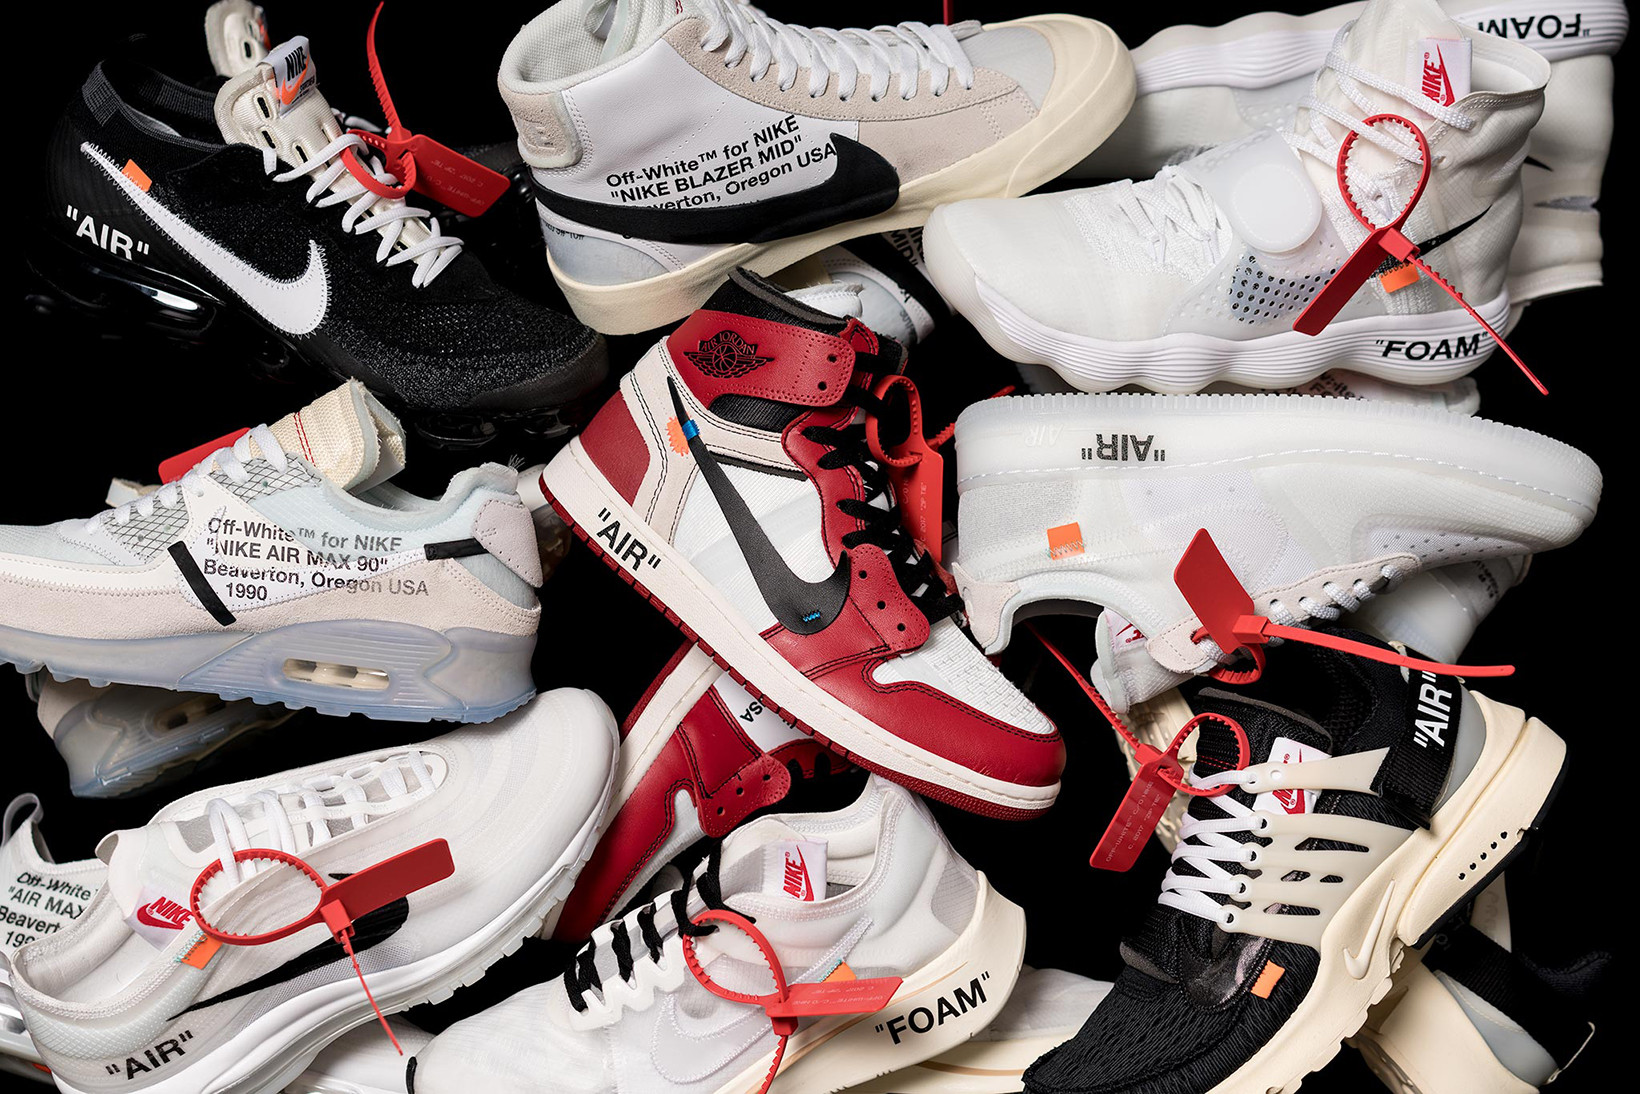 Banzai Prophet Fee The Full Off-White x Nike "THE TEN" Collection Ranked From Worst To Best |  The Sole Supplier